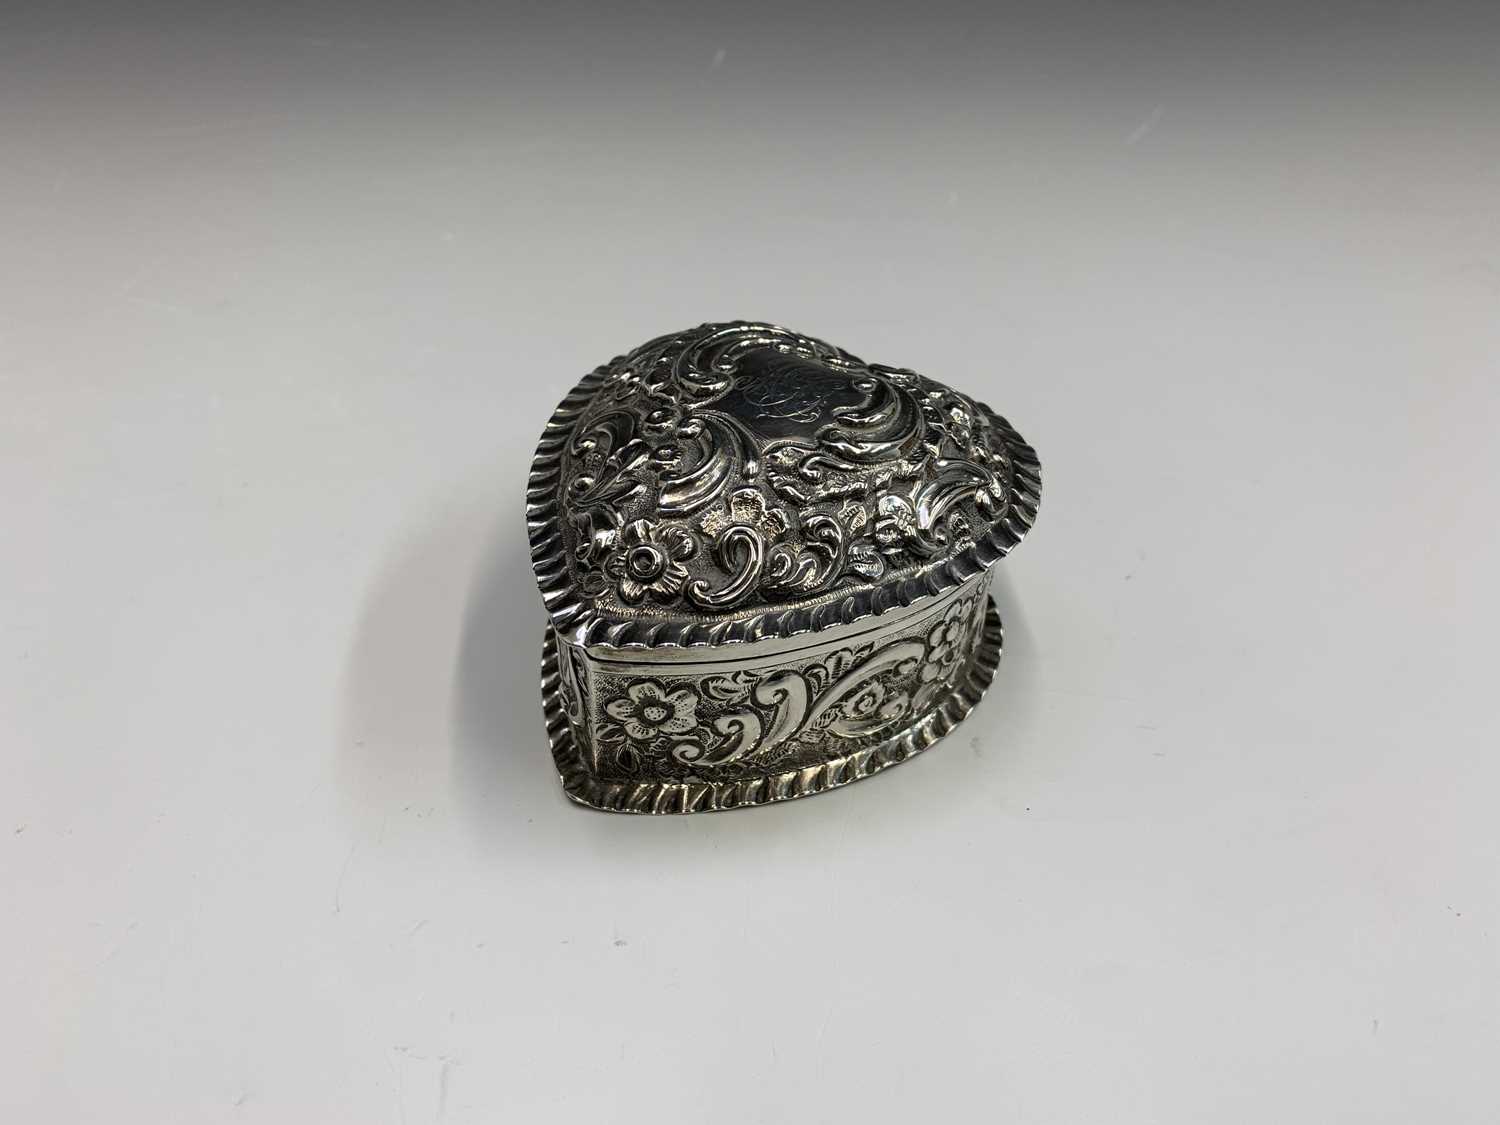 A heart-shaped silver late Victorian box by George Unite with ornate embossed decoration and